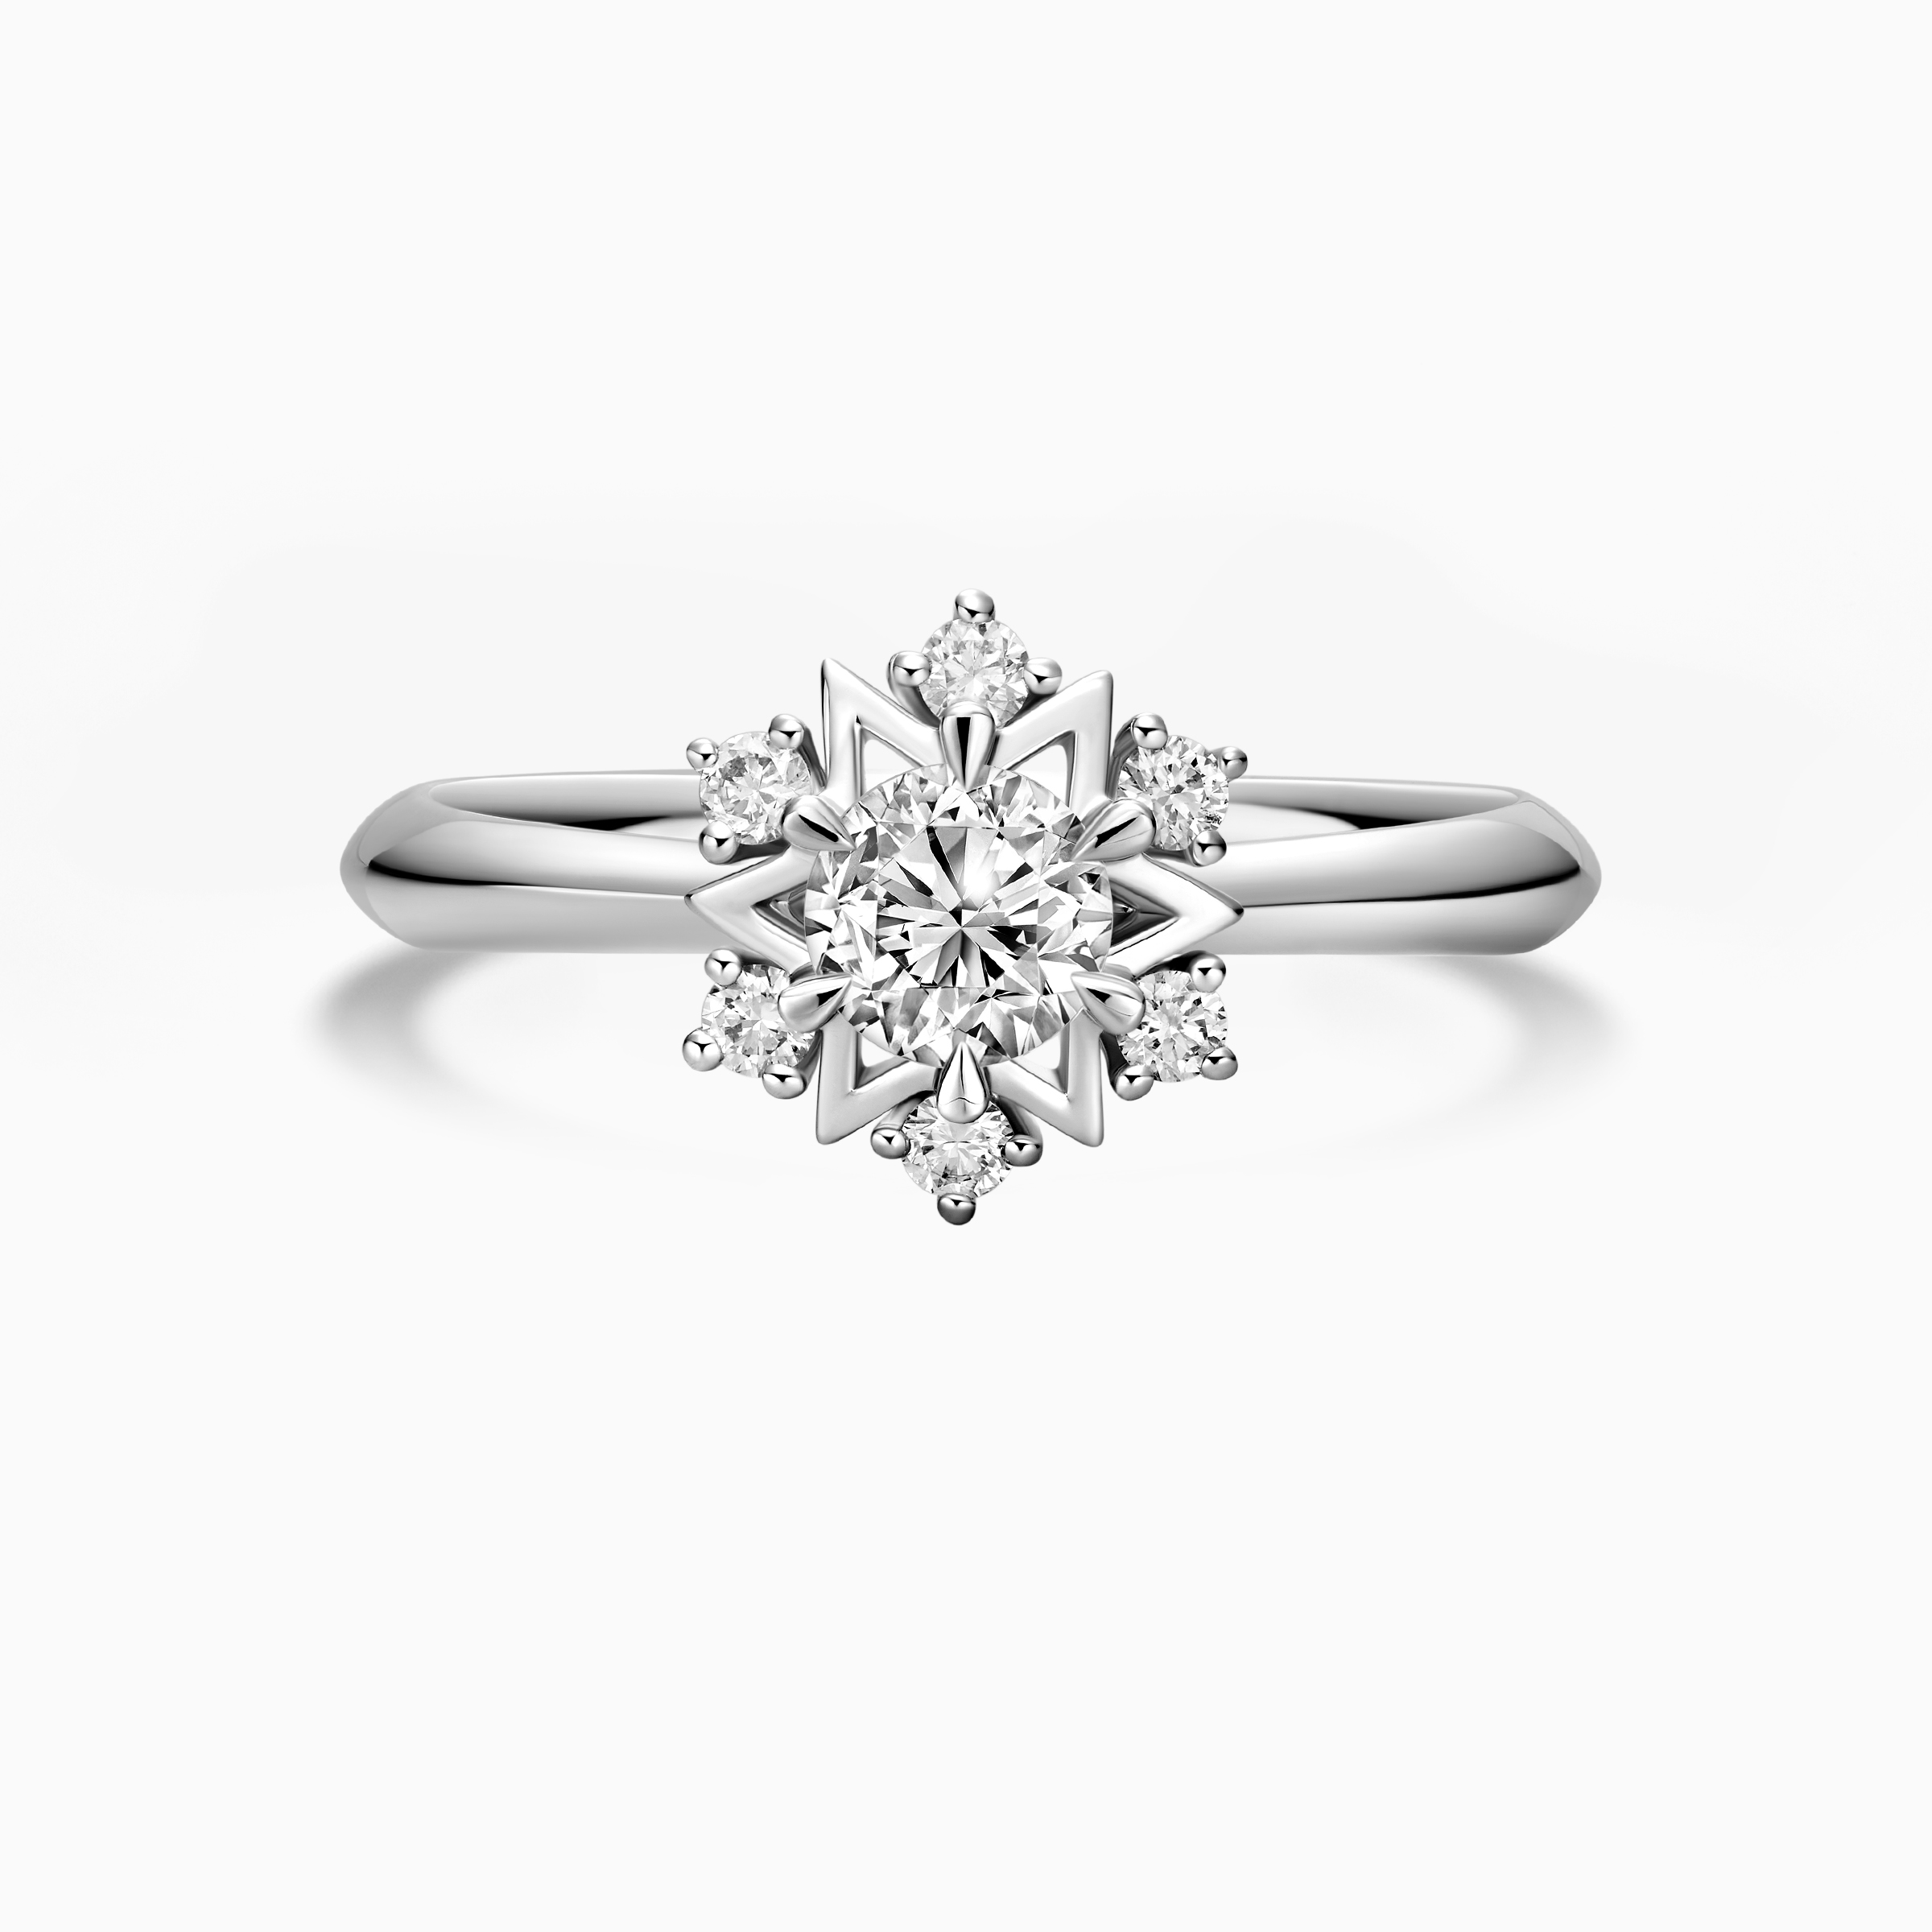 Darry Ring star engagement ring front view